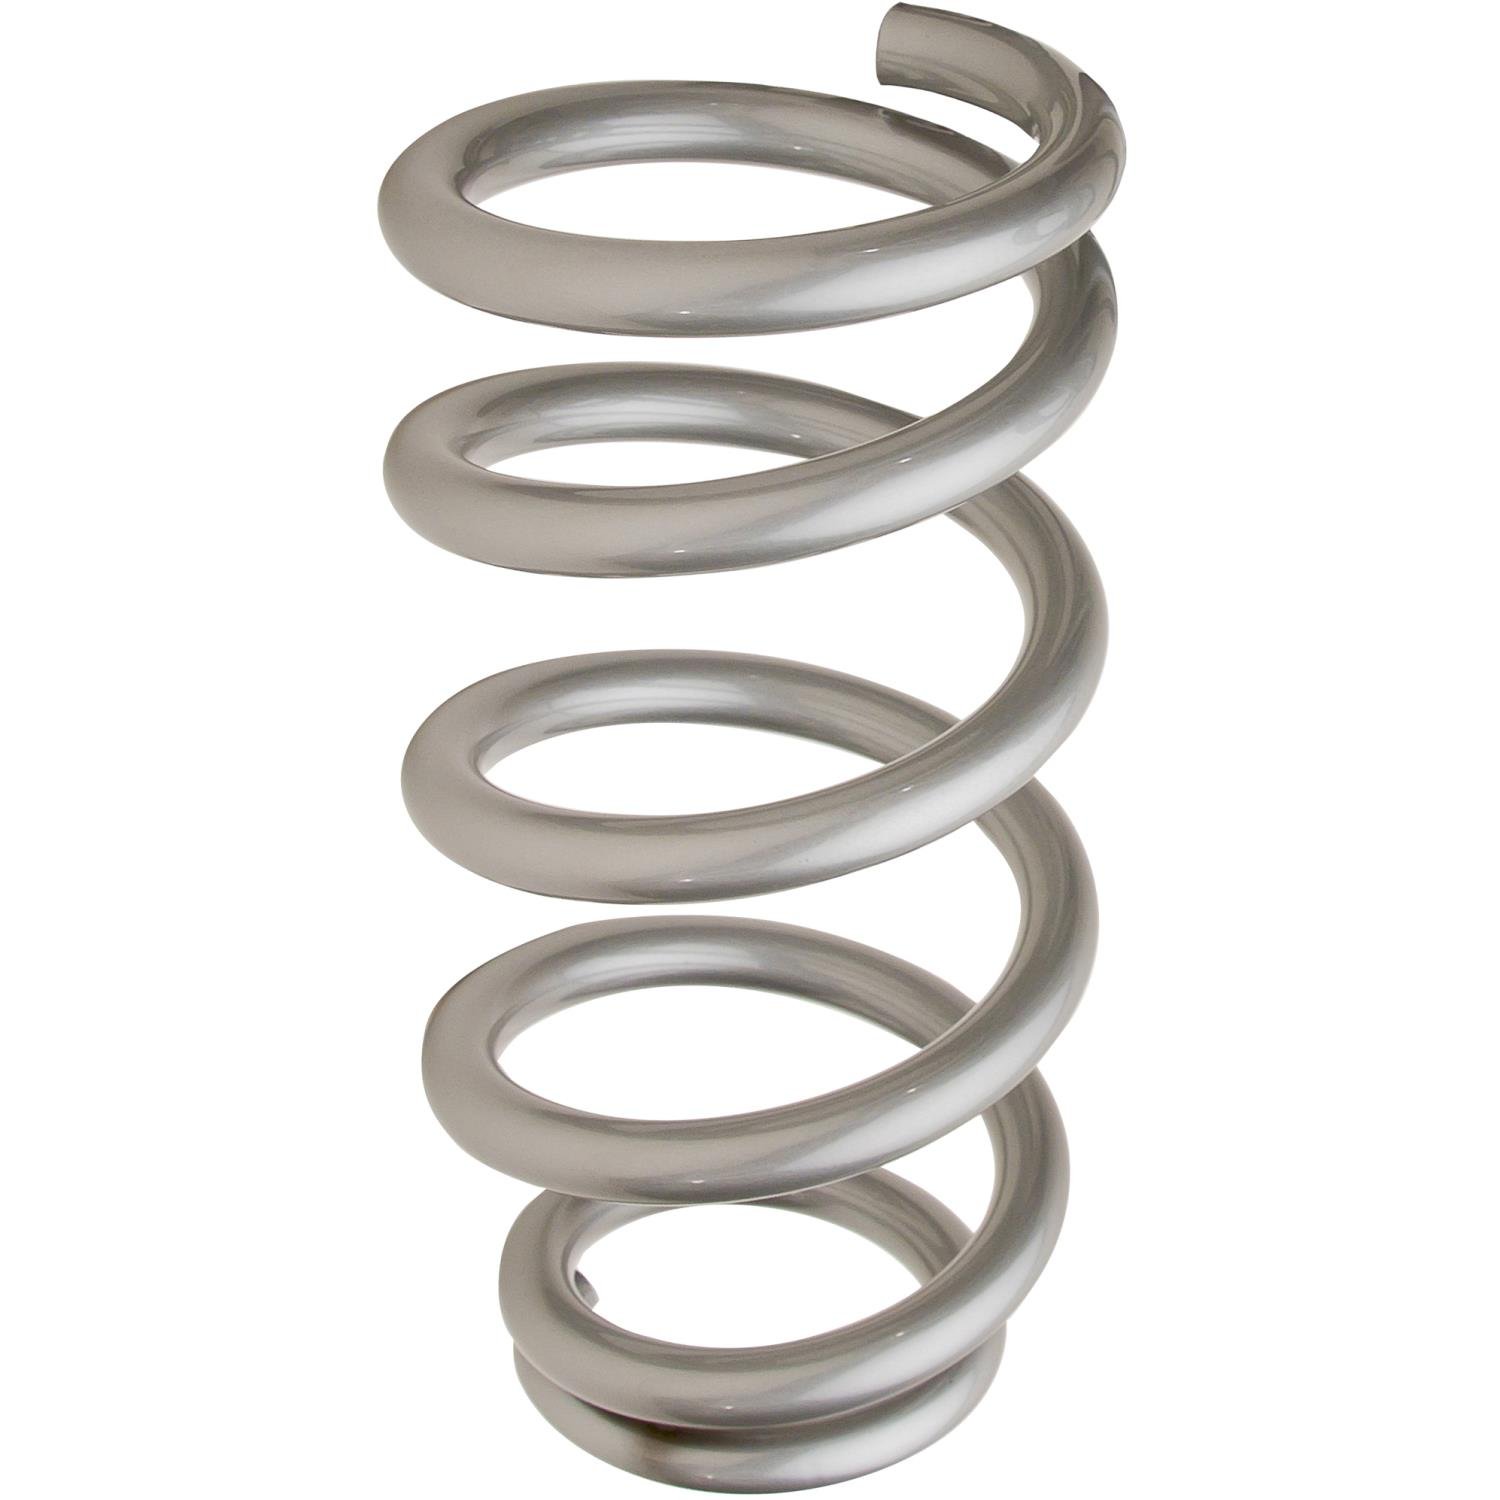 GM Style Pigtail High-Tensile Spring 10"